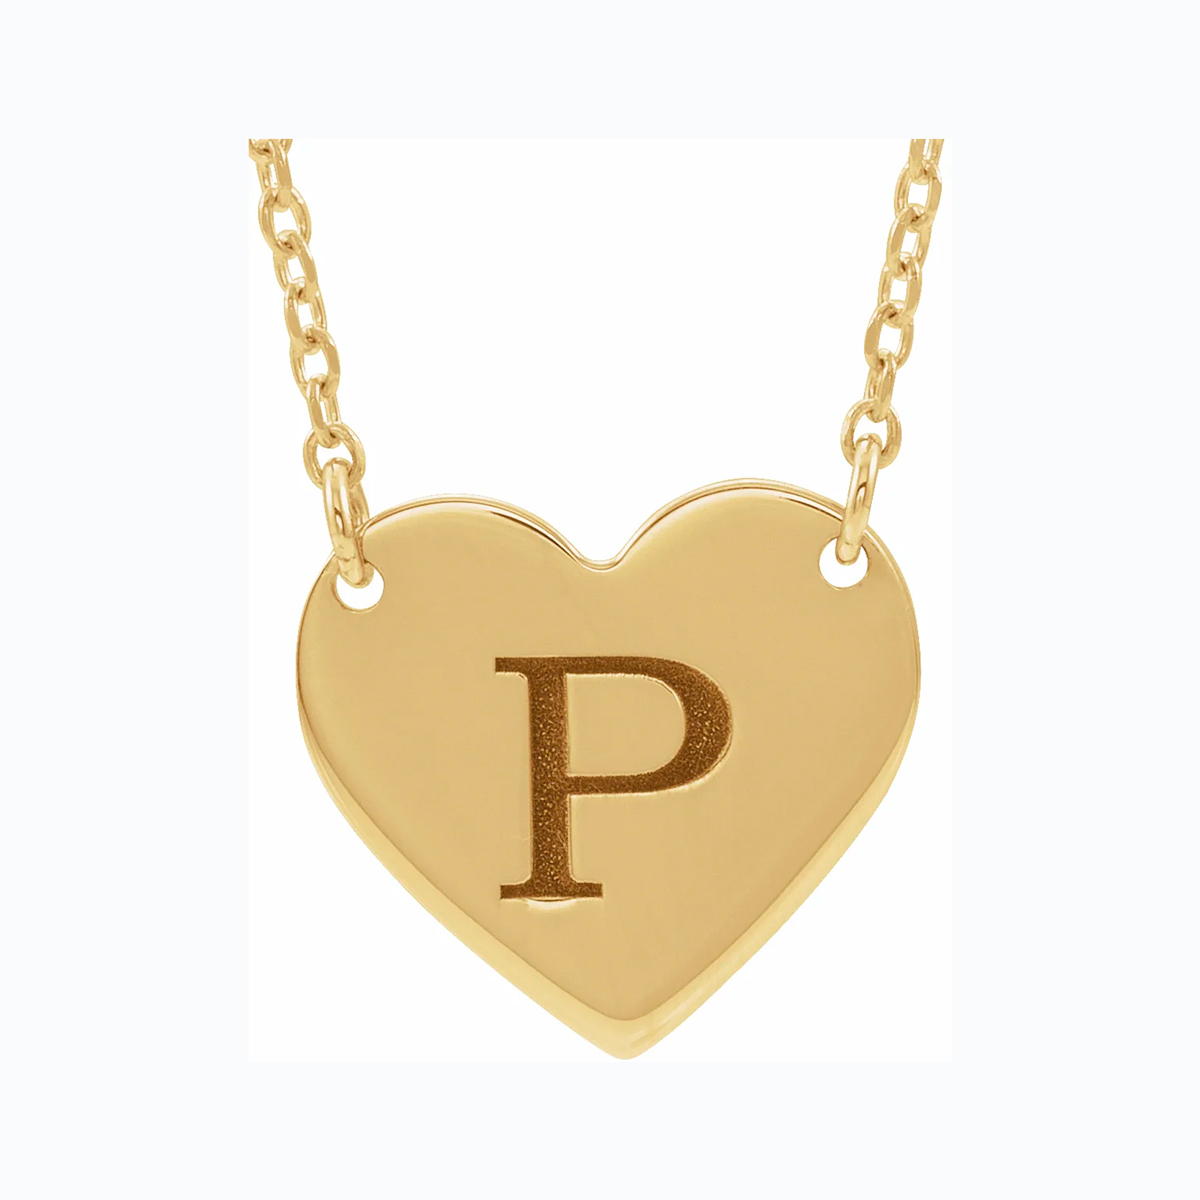 Engravable Heart Necklace, 14k Yellow Gold